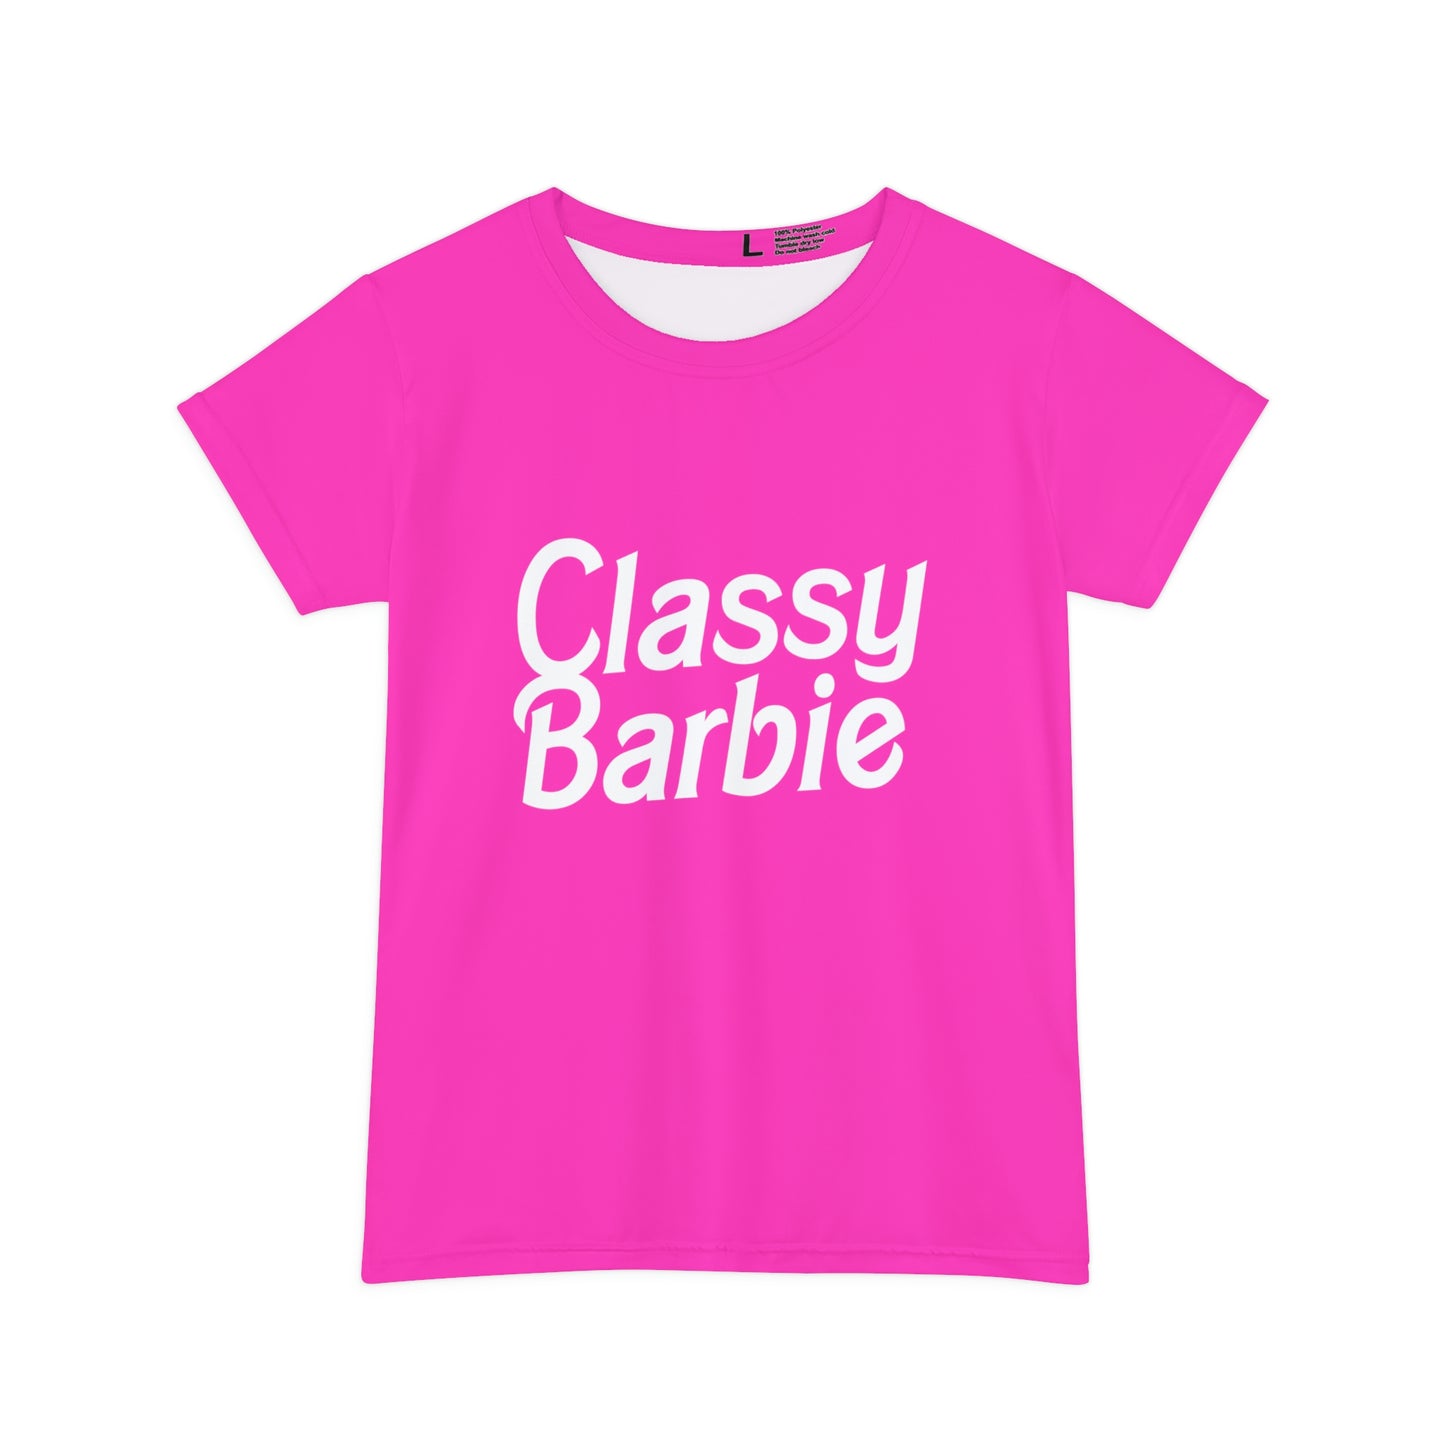 Classy Barbie, Bachelorette Party Shirts, Bridesmaid Gifts, Here comes the Party Tees, Group Party Favor Shirts, Bridal Party Shirt for women